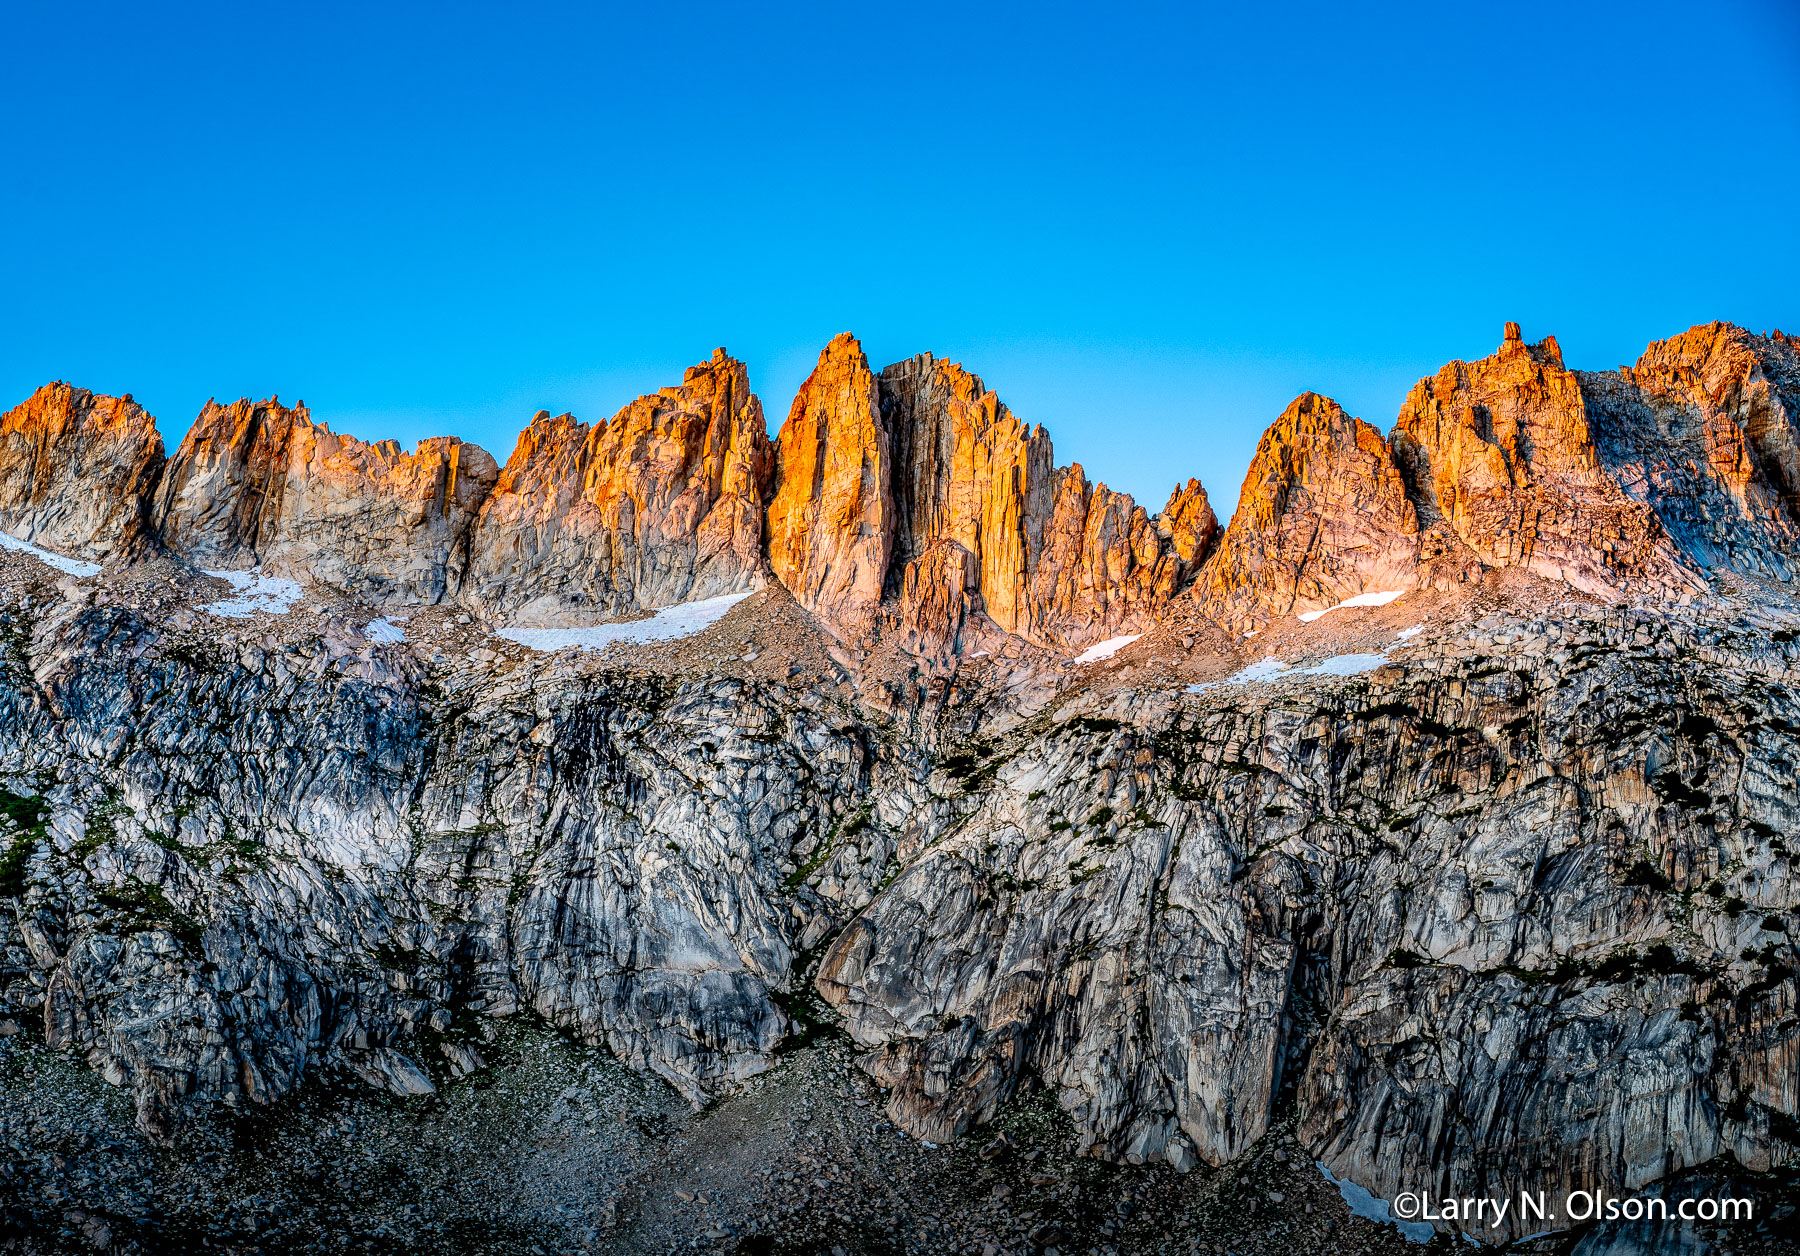 Sawtooth Ridge, Yosemite National Park, California | The last light of the day lingers on the granite spires next to the Matterhorn.